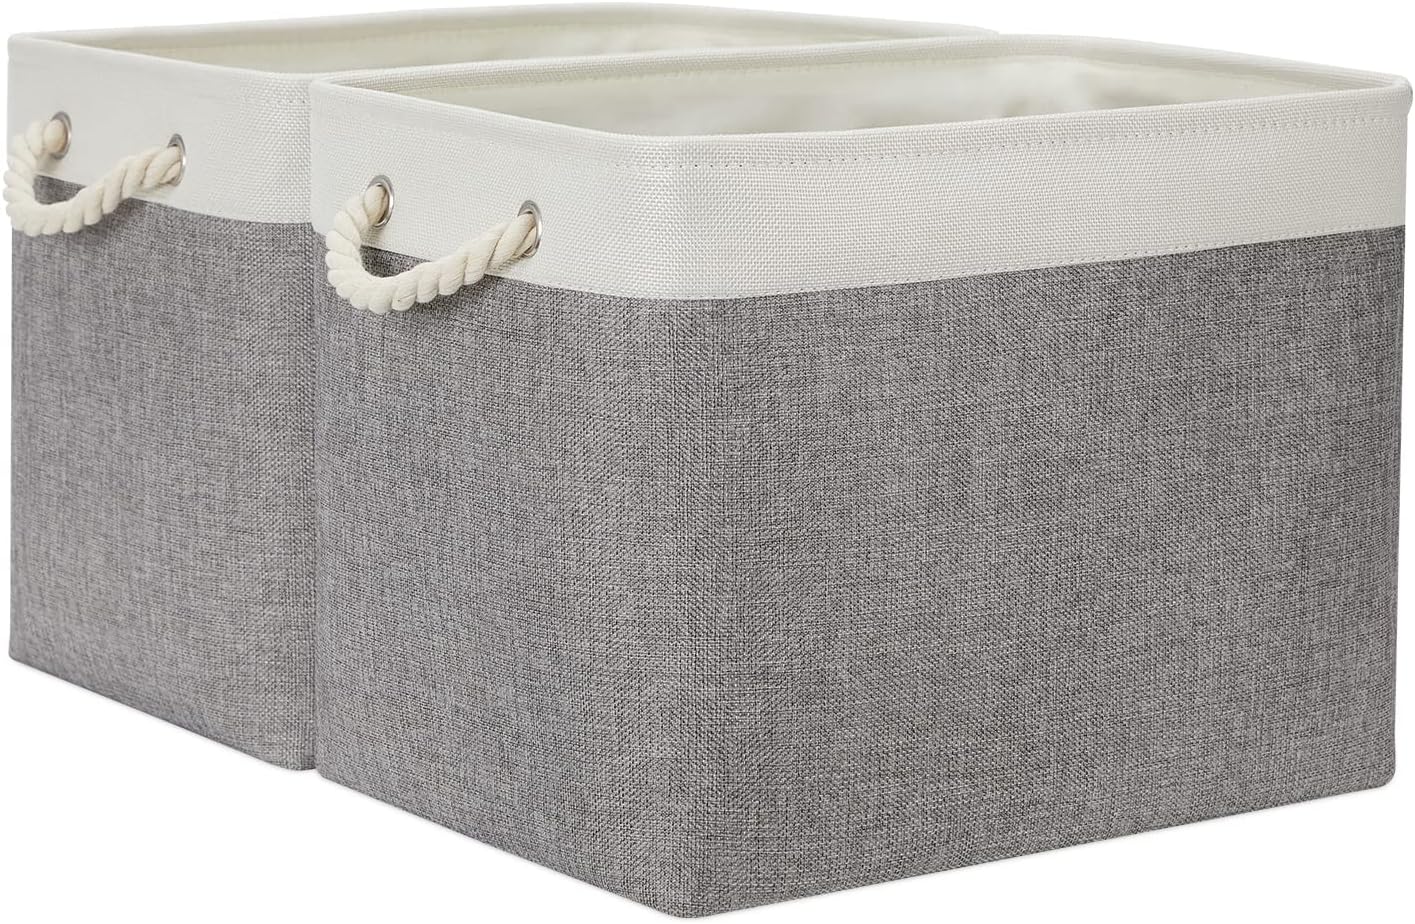 Temary Baskets for Organizing, 2 Pack Storage Baskets Large Fabric Baskets with Handles, Decorative Baskets for Gifts Empty for Home, Office, Nursery (White&Grey,16Lx12Wx12H Inches)